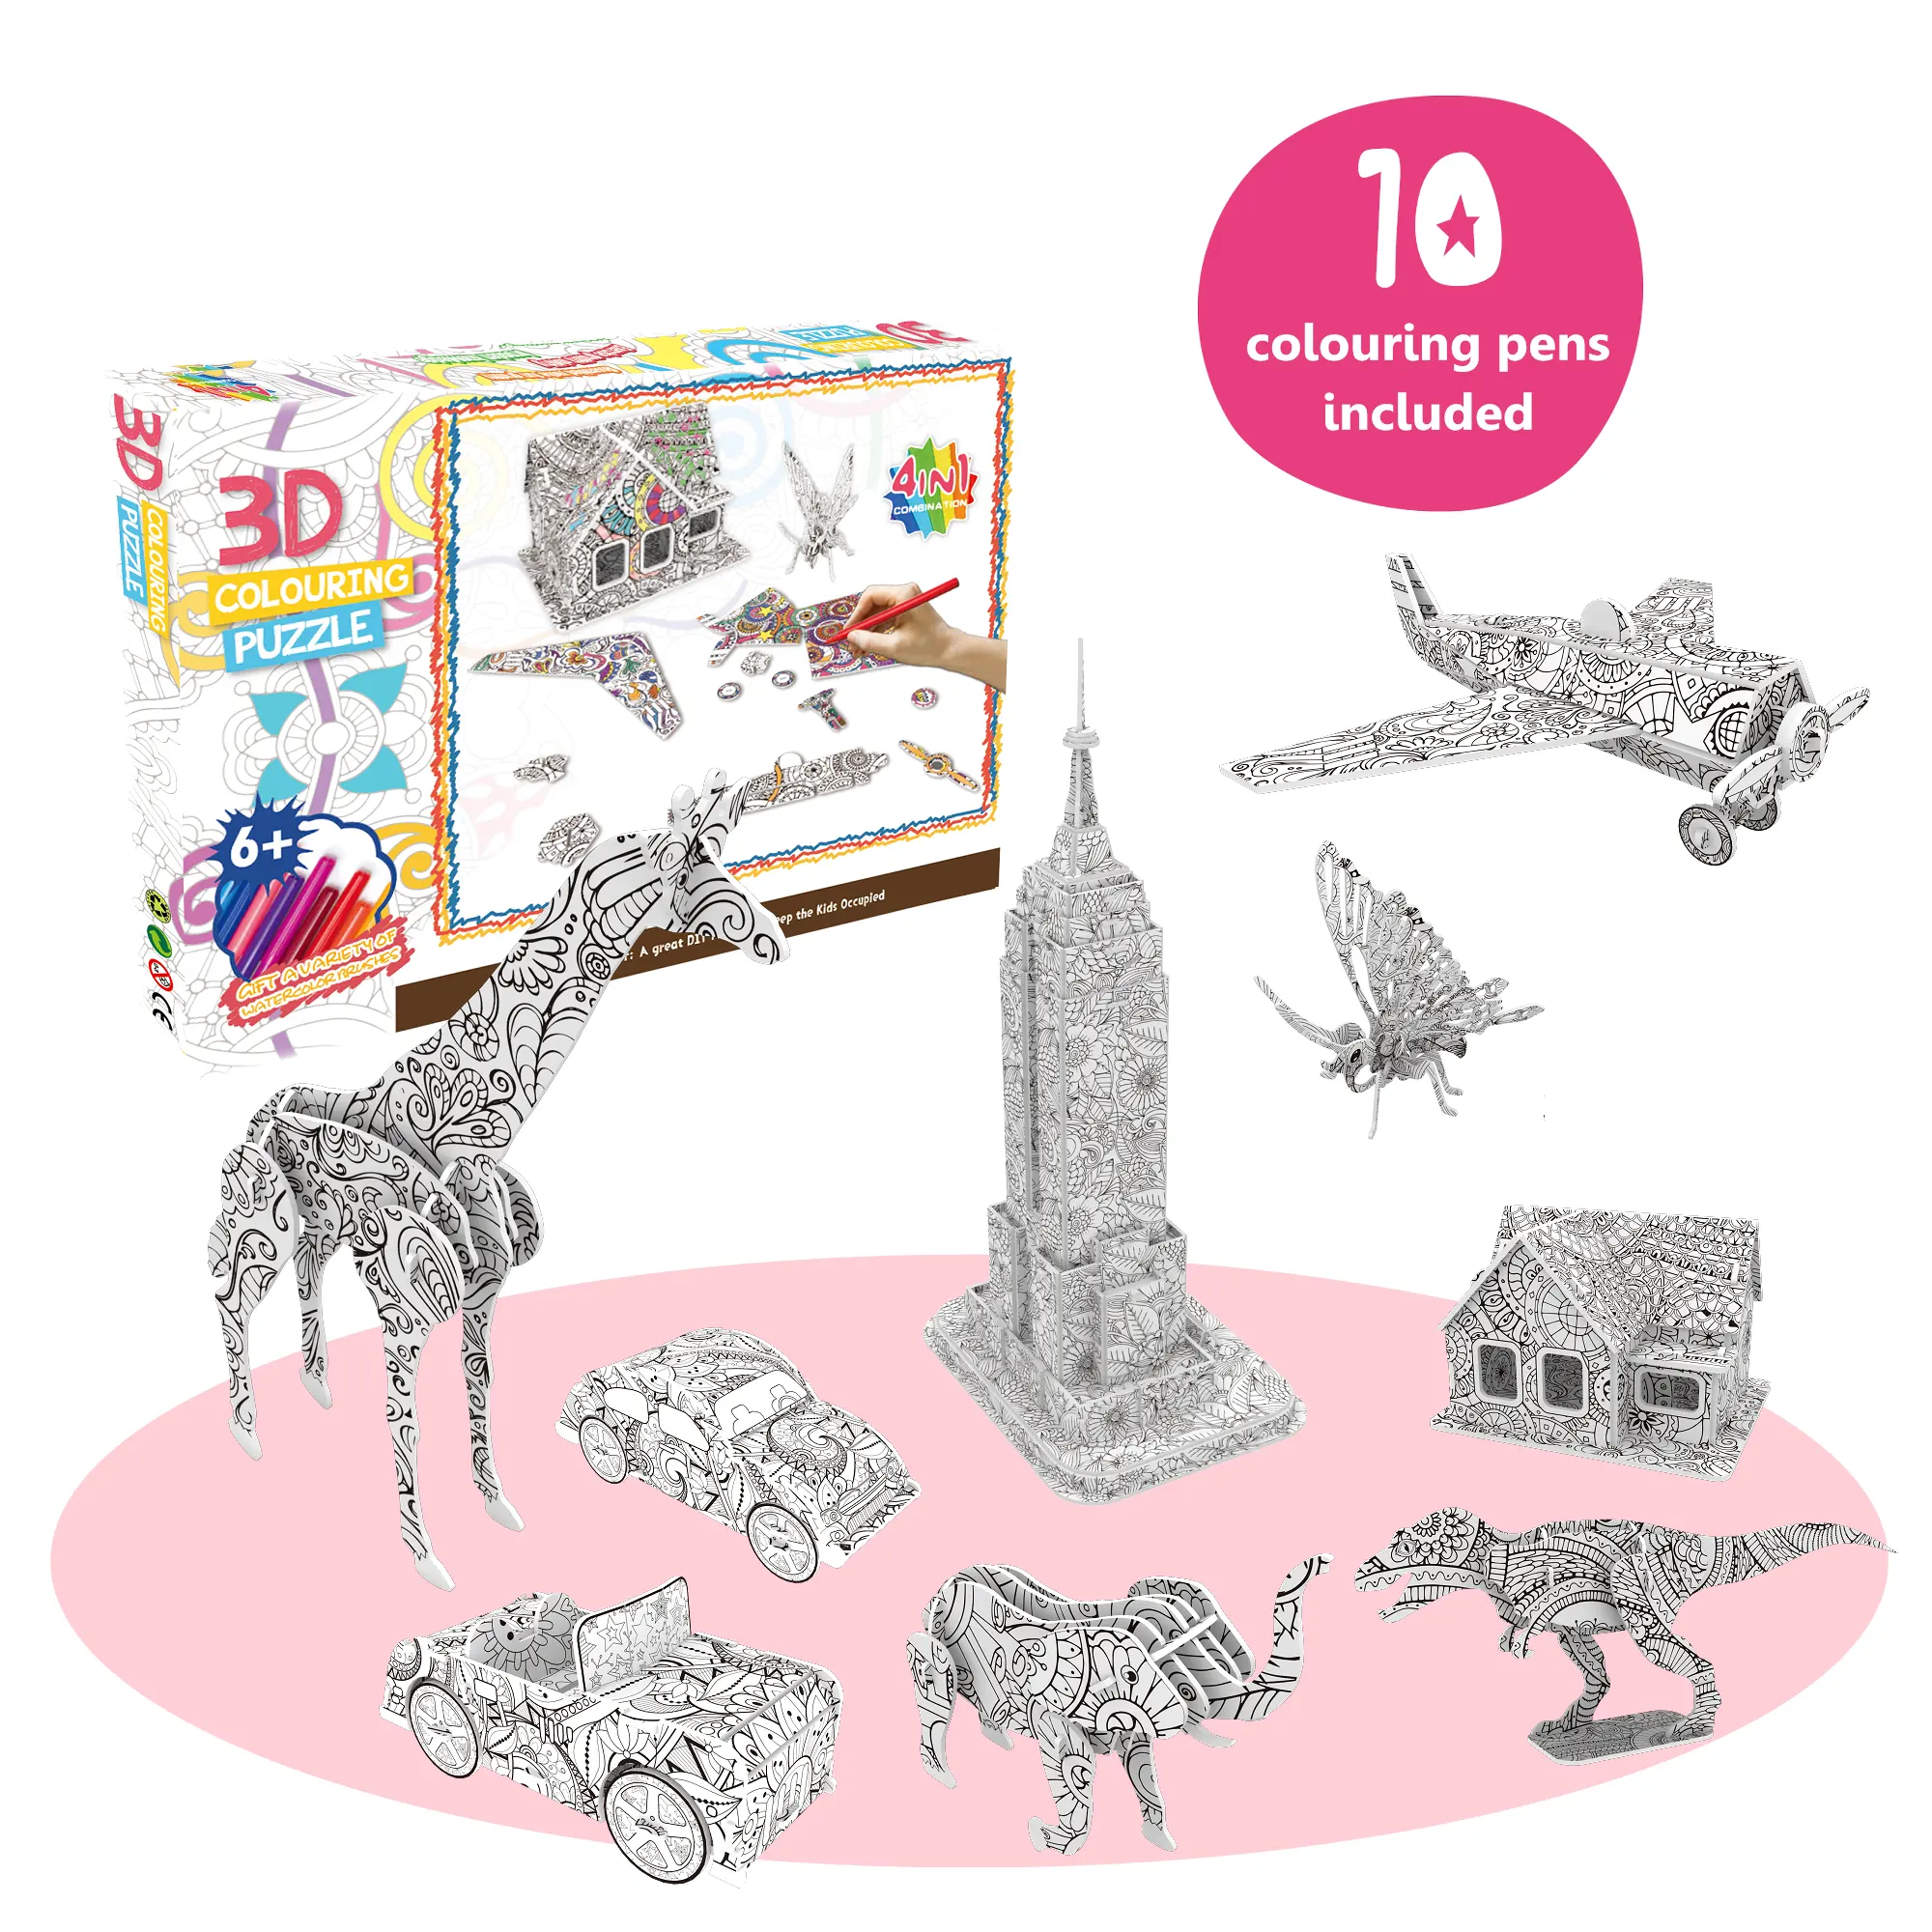 Best Selling Toy 3D Puzzle Set 9 in 1 Coloring Puzzle for Kids Kids Creative Activity